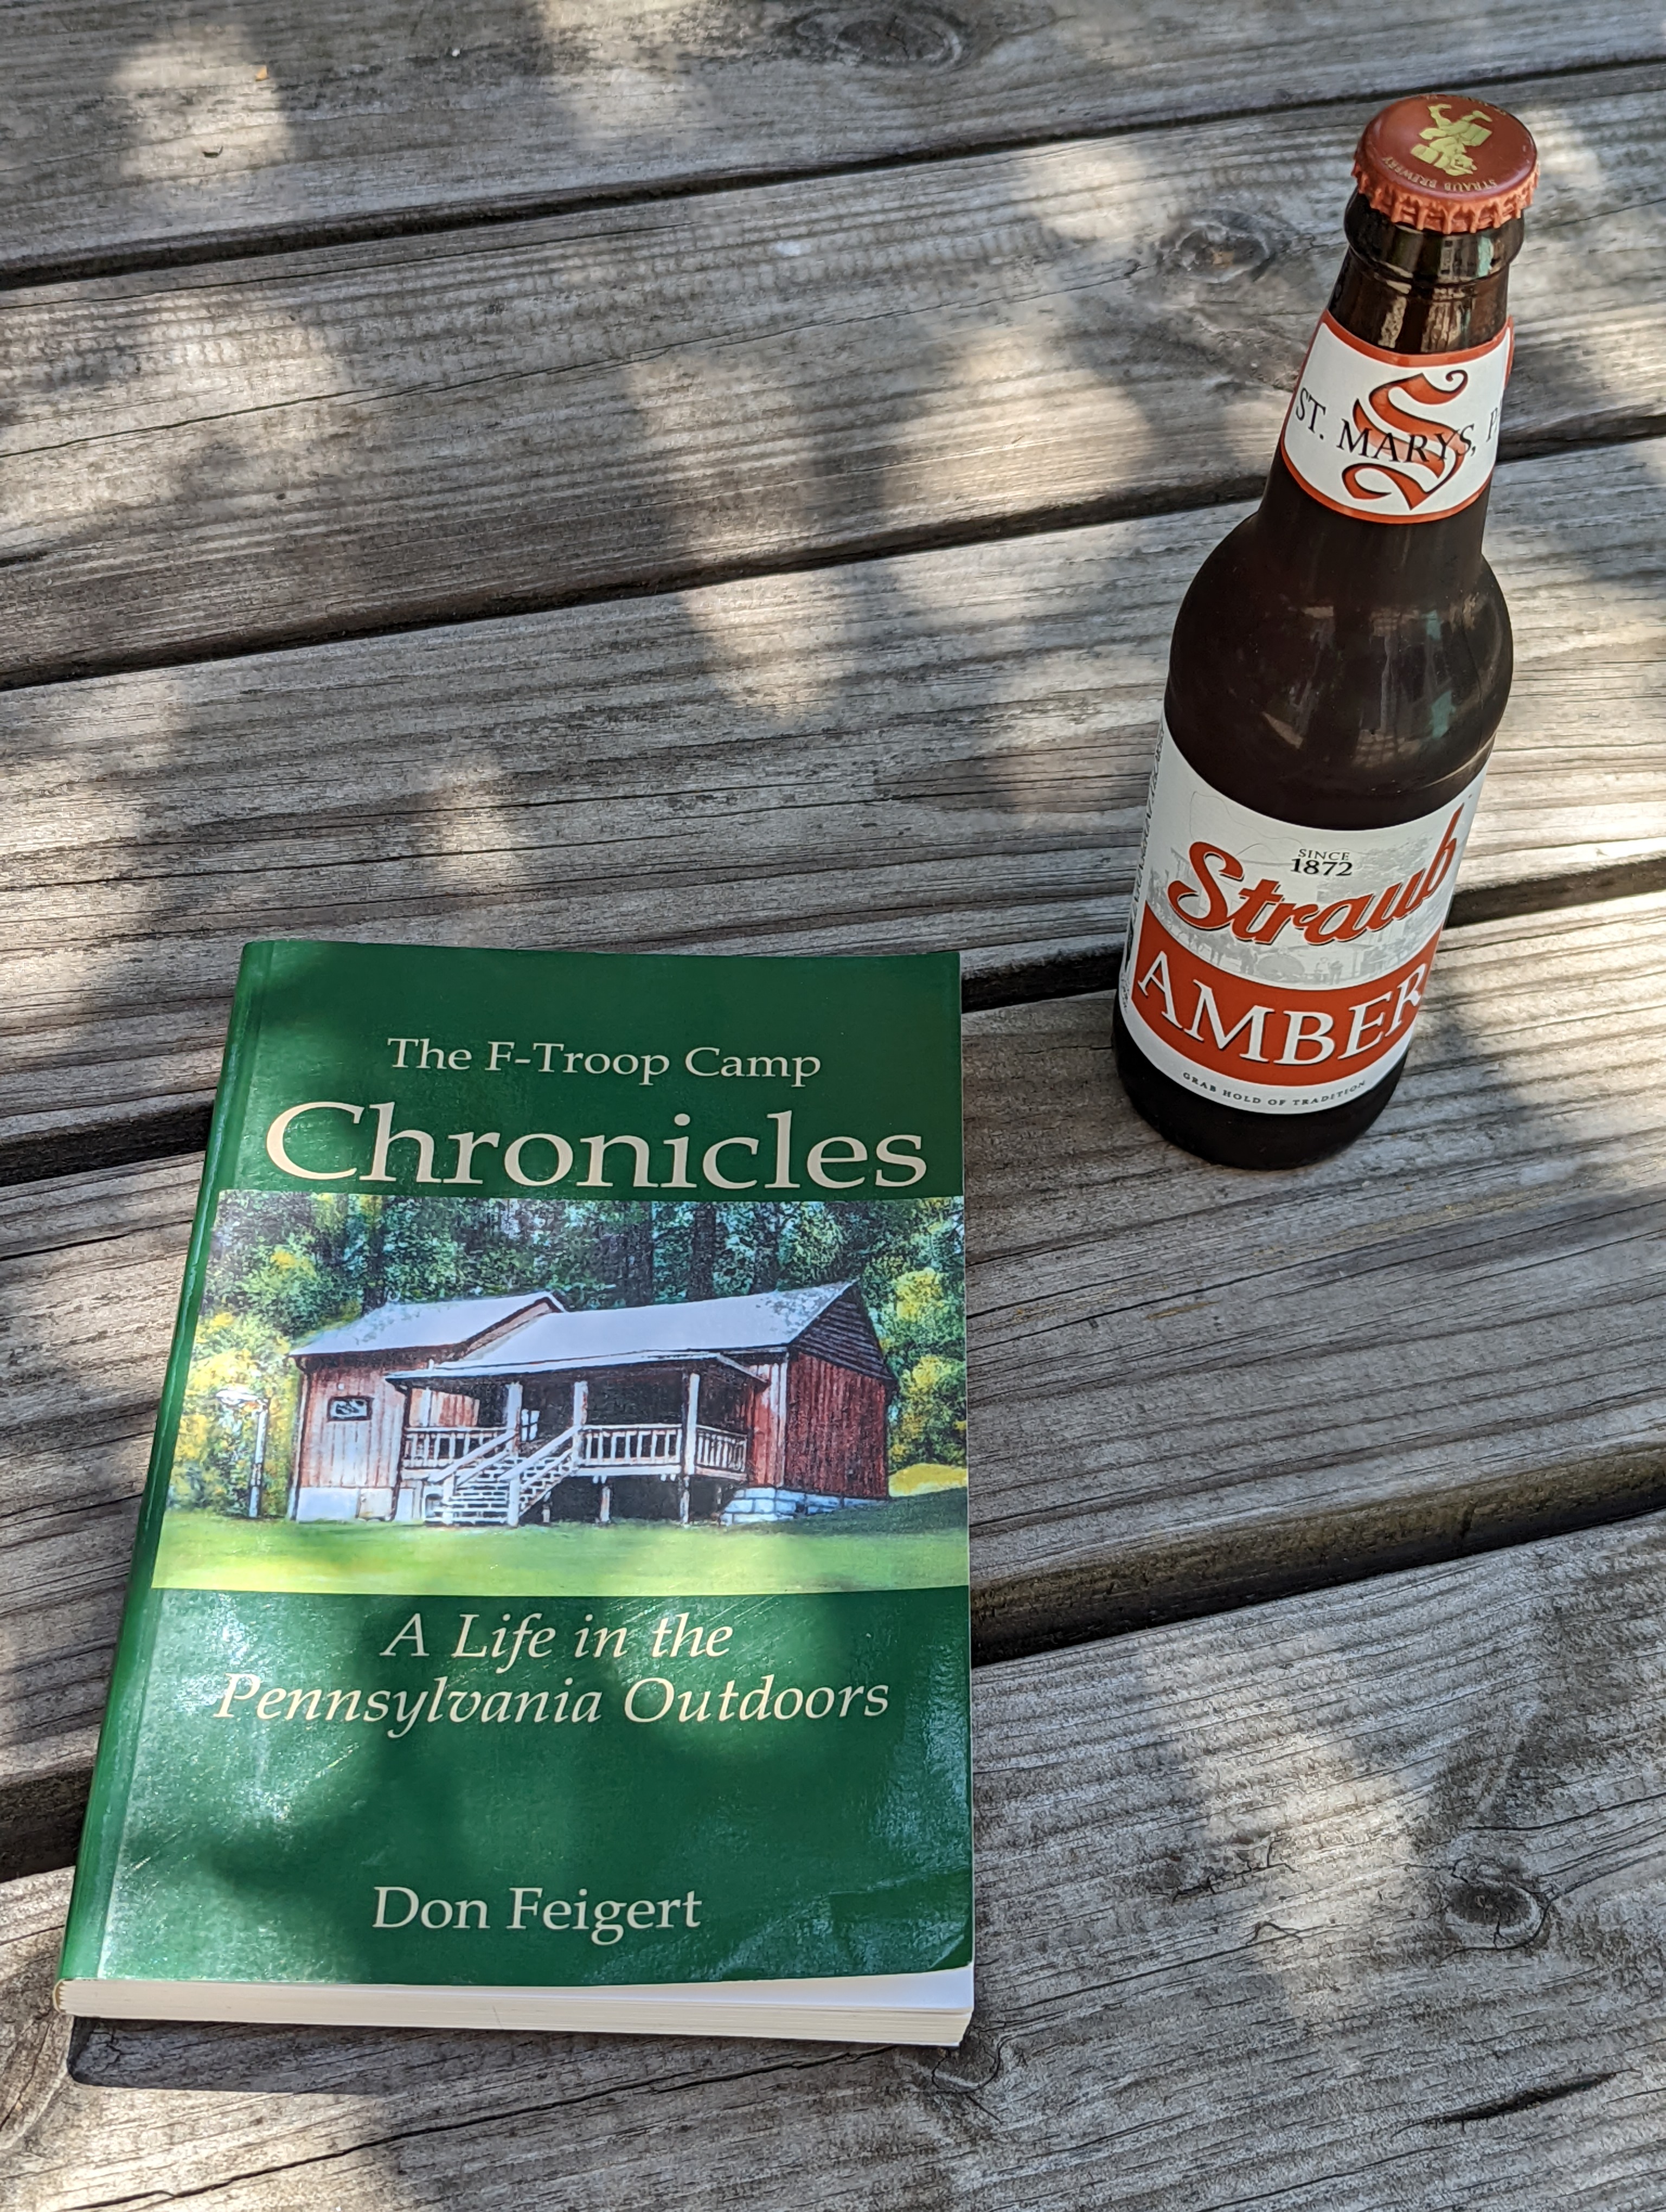 F-Troop Camp Chronicles and a Cool Straub Lager